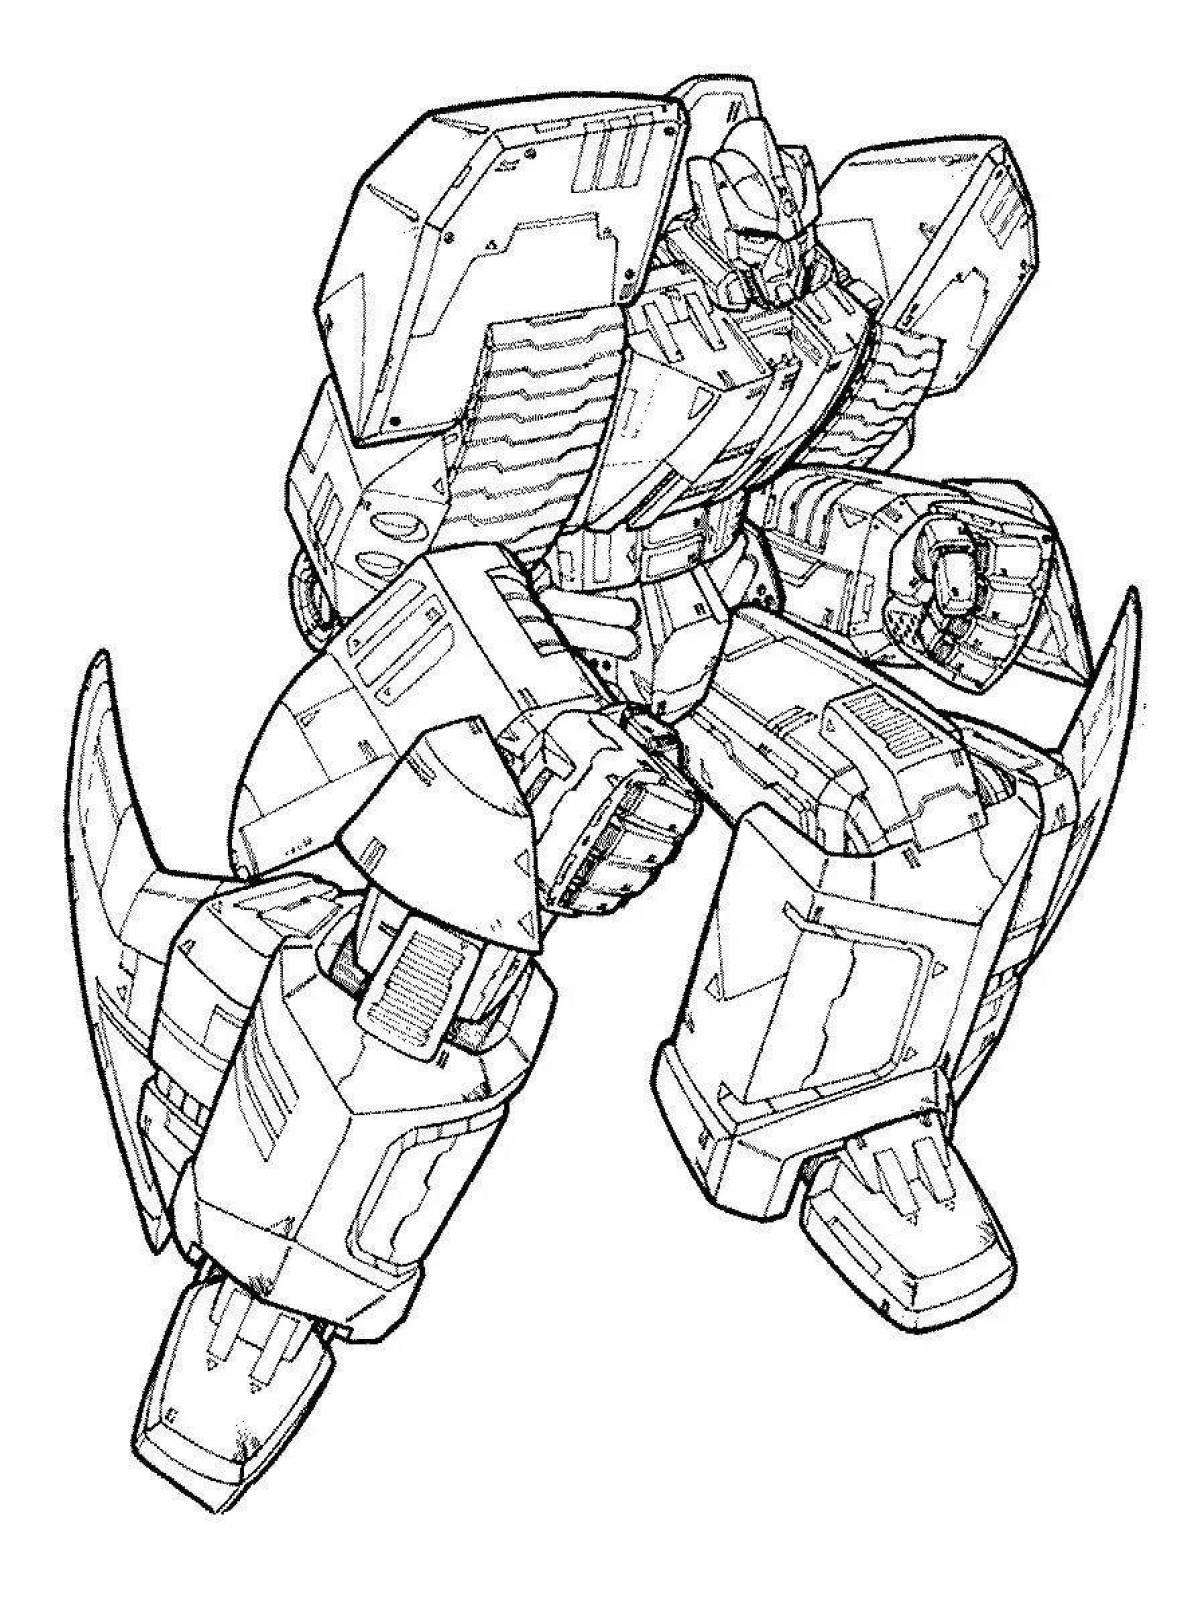 Impressive robot coloring pages for boys